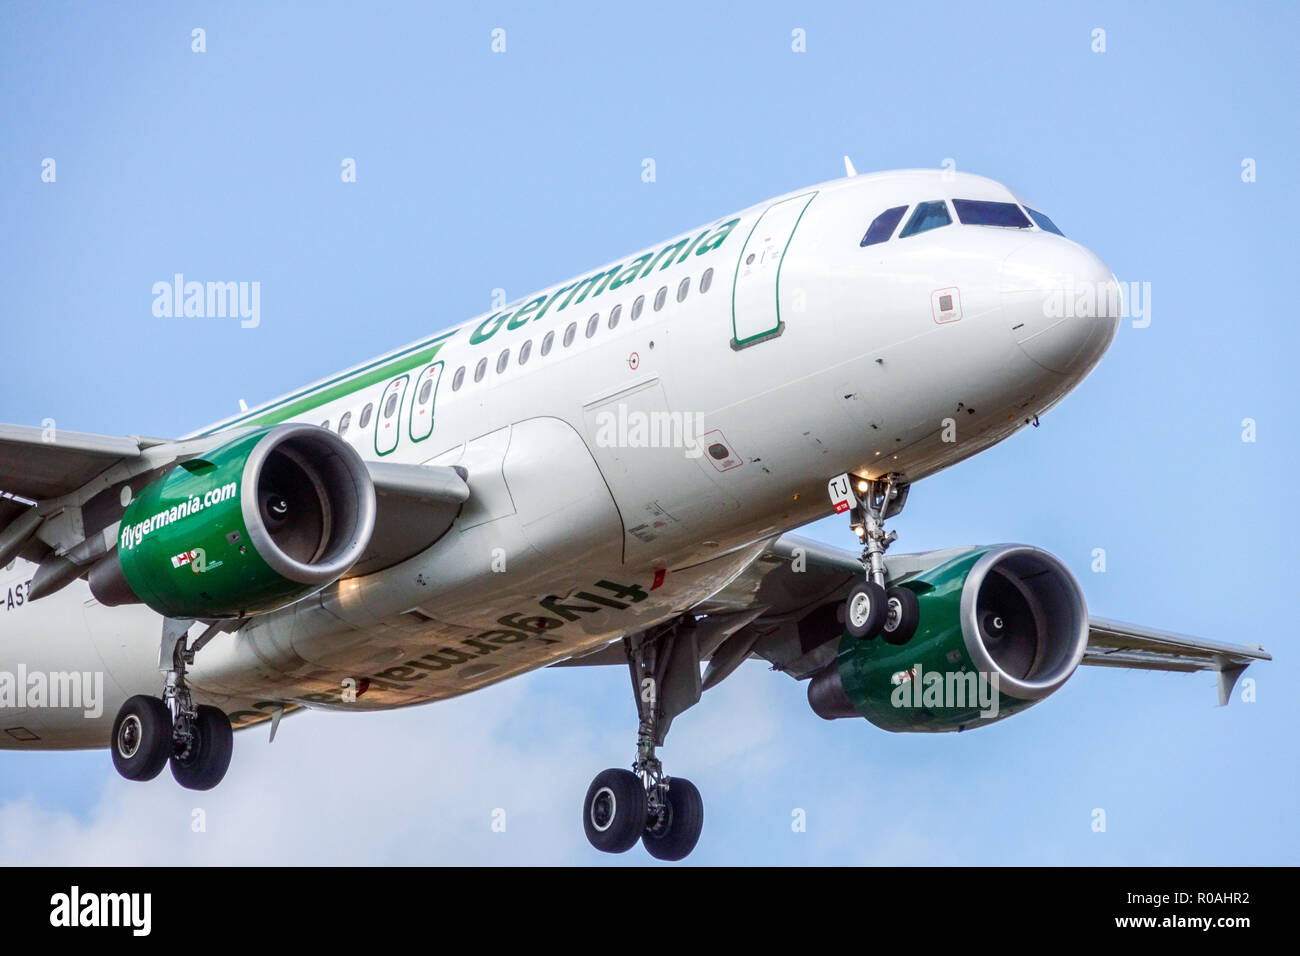 Plane Airbus A319 Germania airlines plane landing Stock Photo